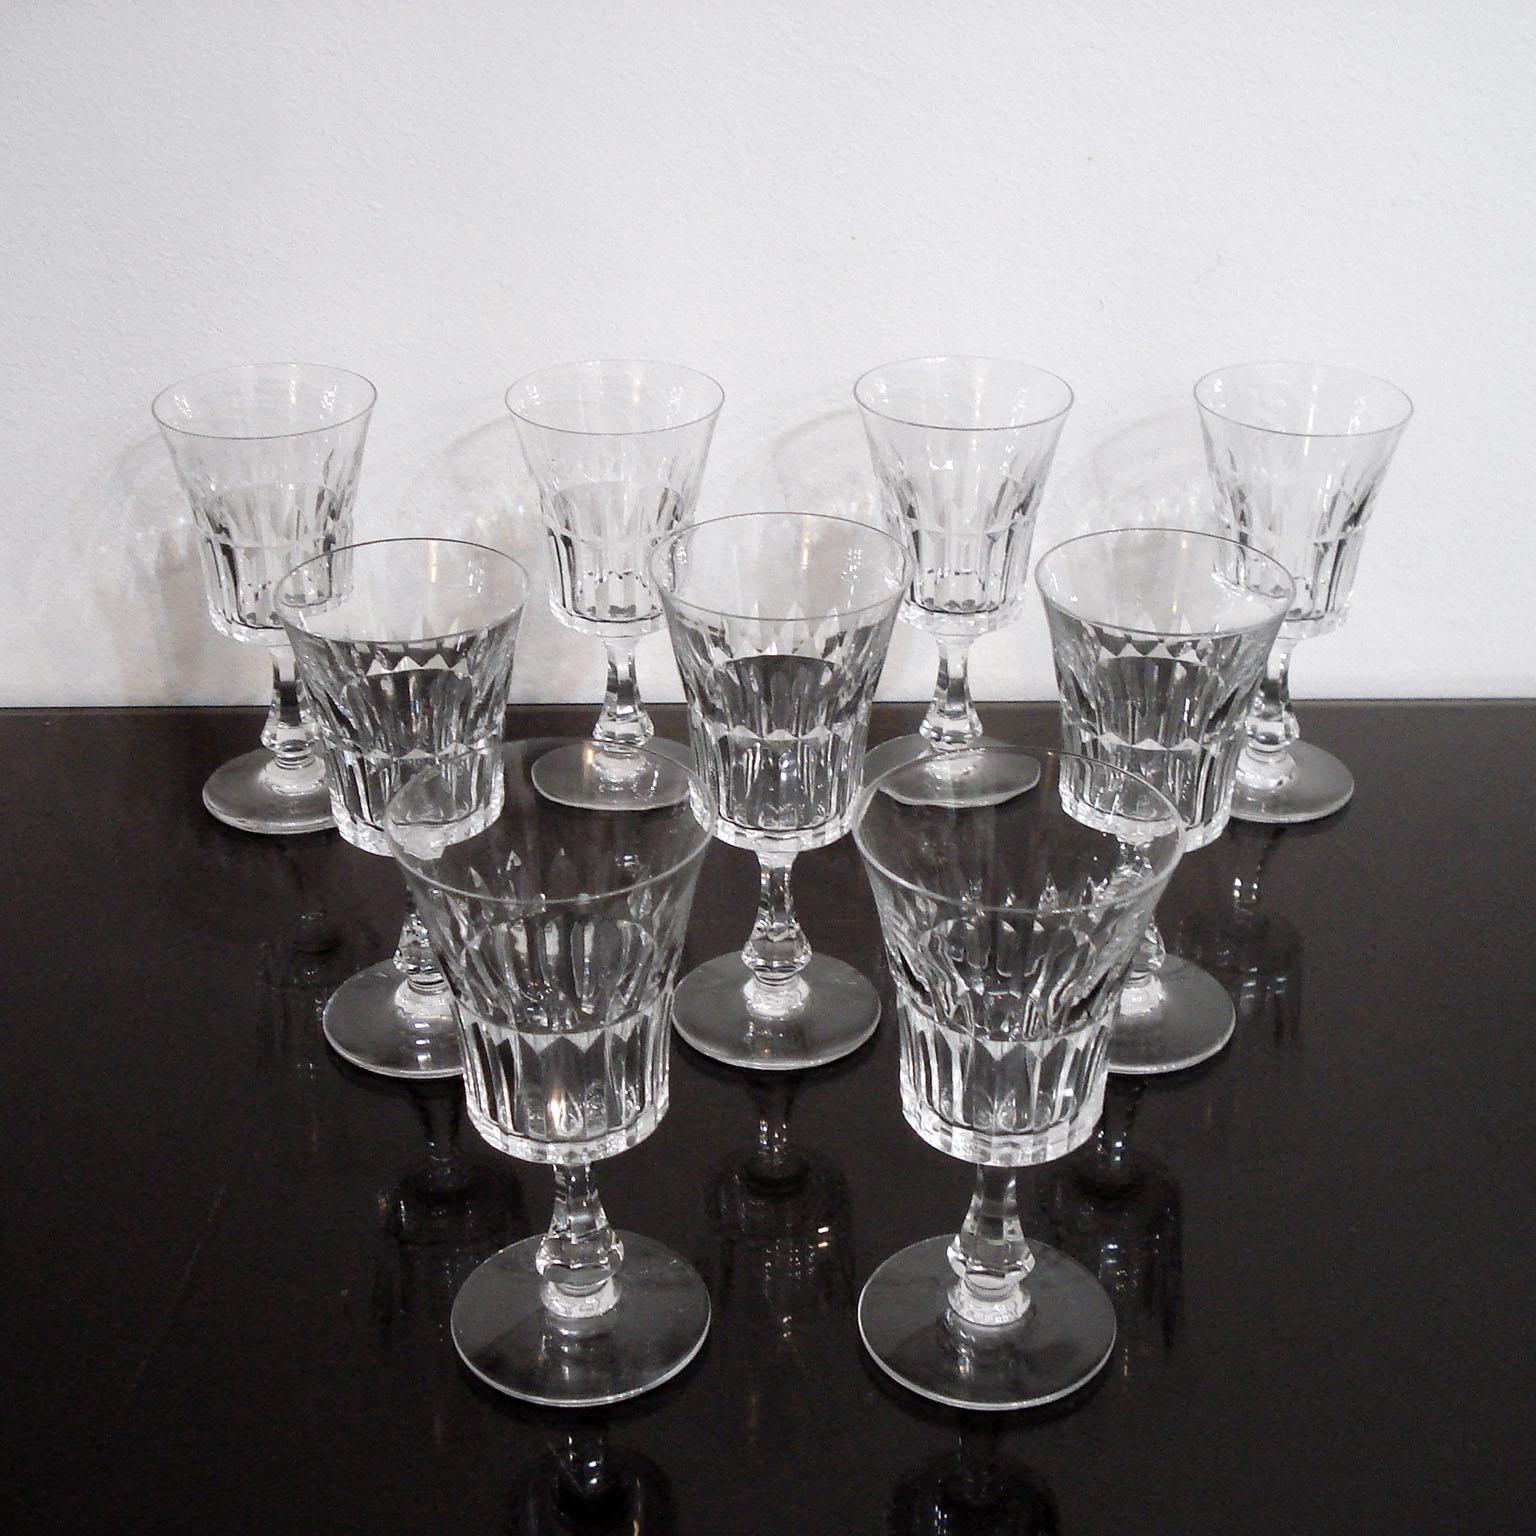 Extremely rare cut crystal Porto glasses by Baccarat, Navarre pattern. Each glass marked under the bottom with etched Baccarat mark.
The Navarre pattern has been produced only between 1952-1961.
Measures: Height 13.5 cm (5.7 in.)
Excellent